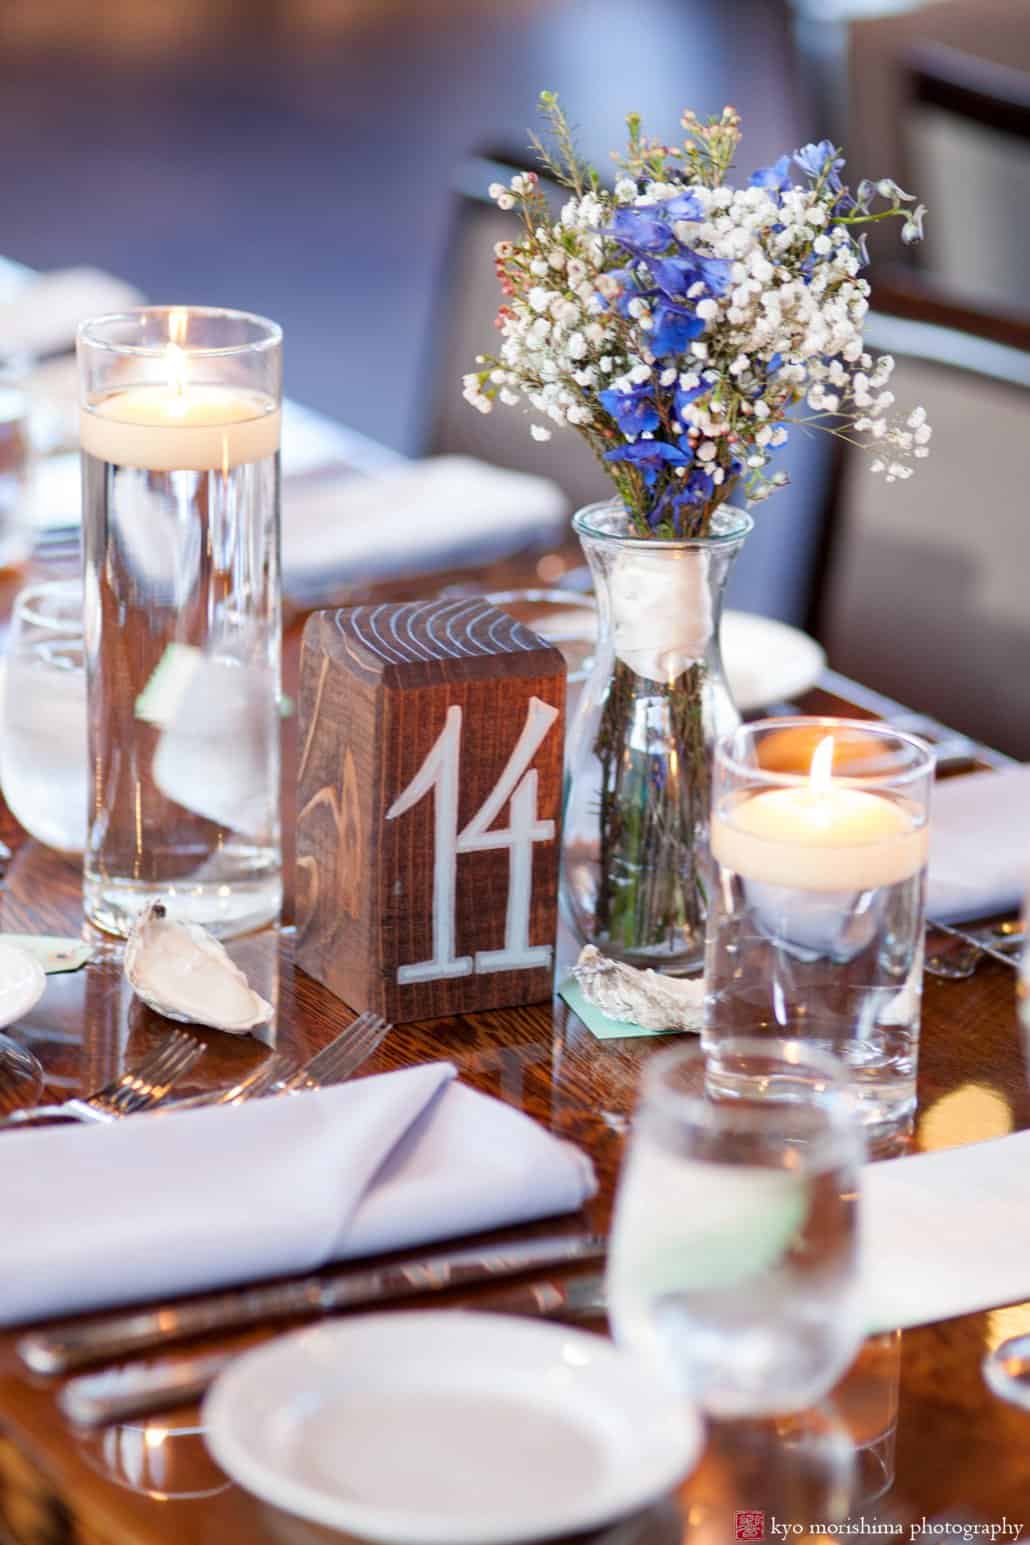 Table setting at Tim McLoone's Supper Club wedding in Asbury Park, photographed by Kyo Morishima